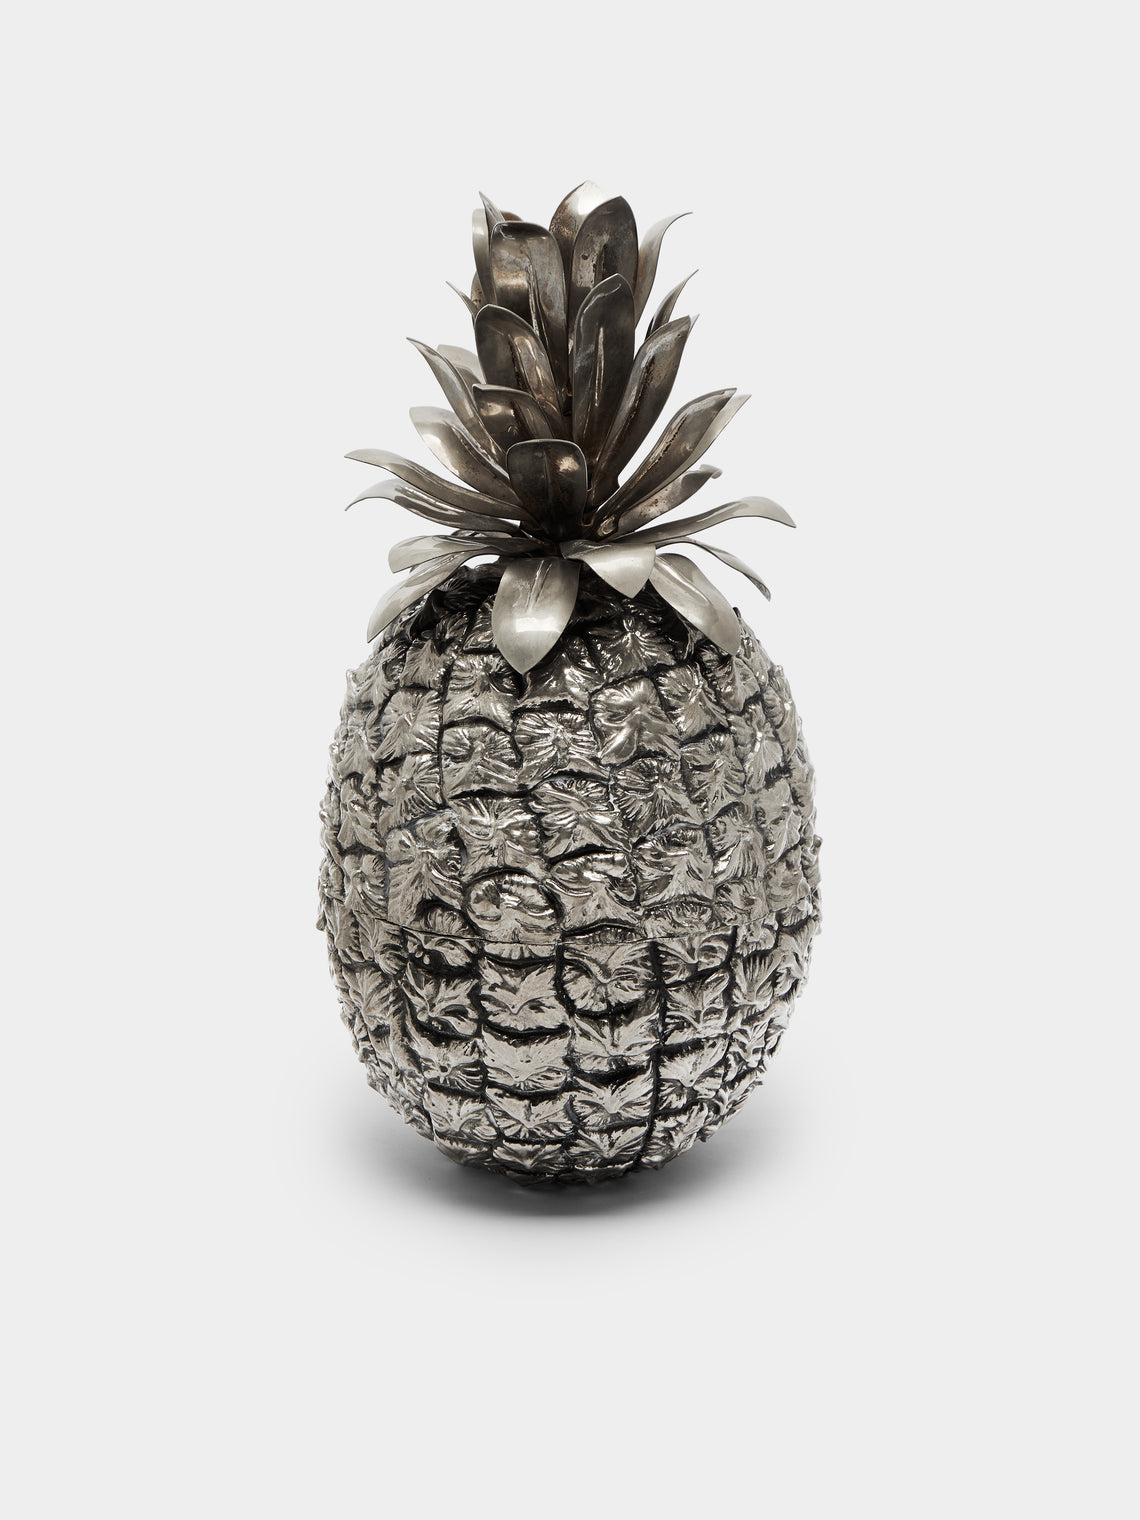 Antique and Vintage - 1960 Mauro Manetti Silver-Plated Pineapple Cooler -  - ABASK - 